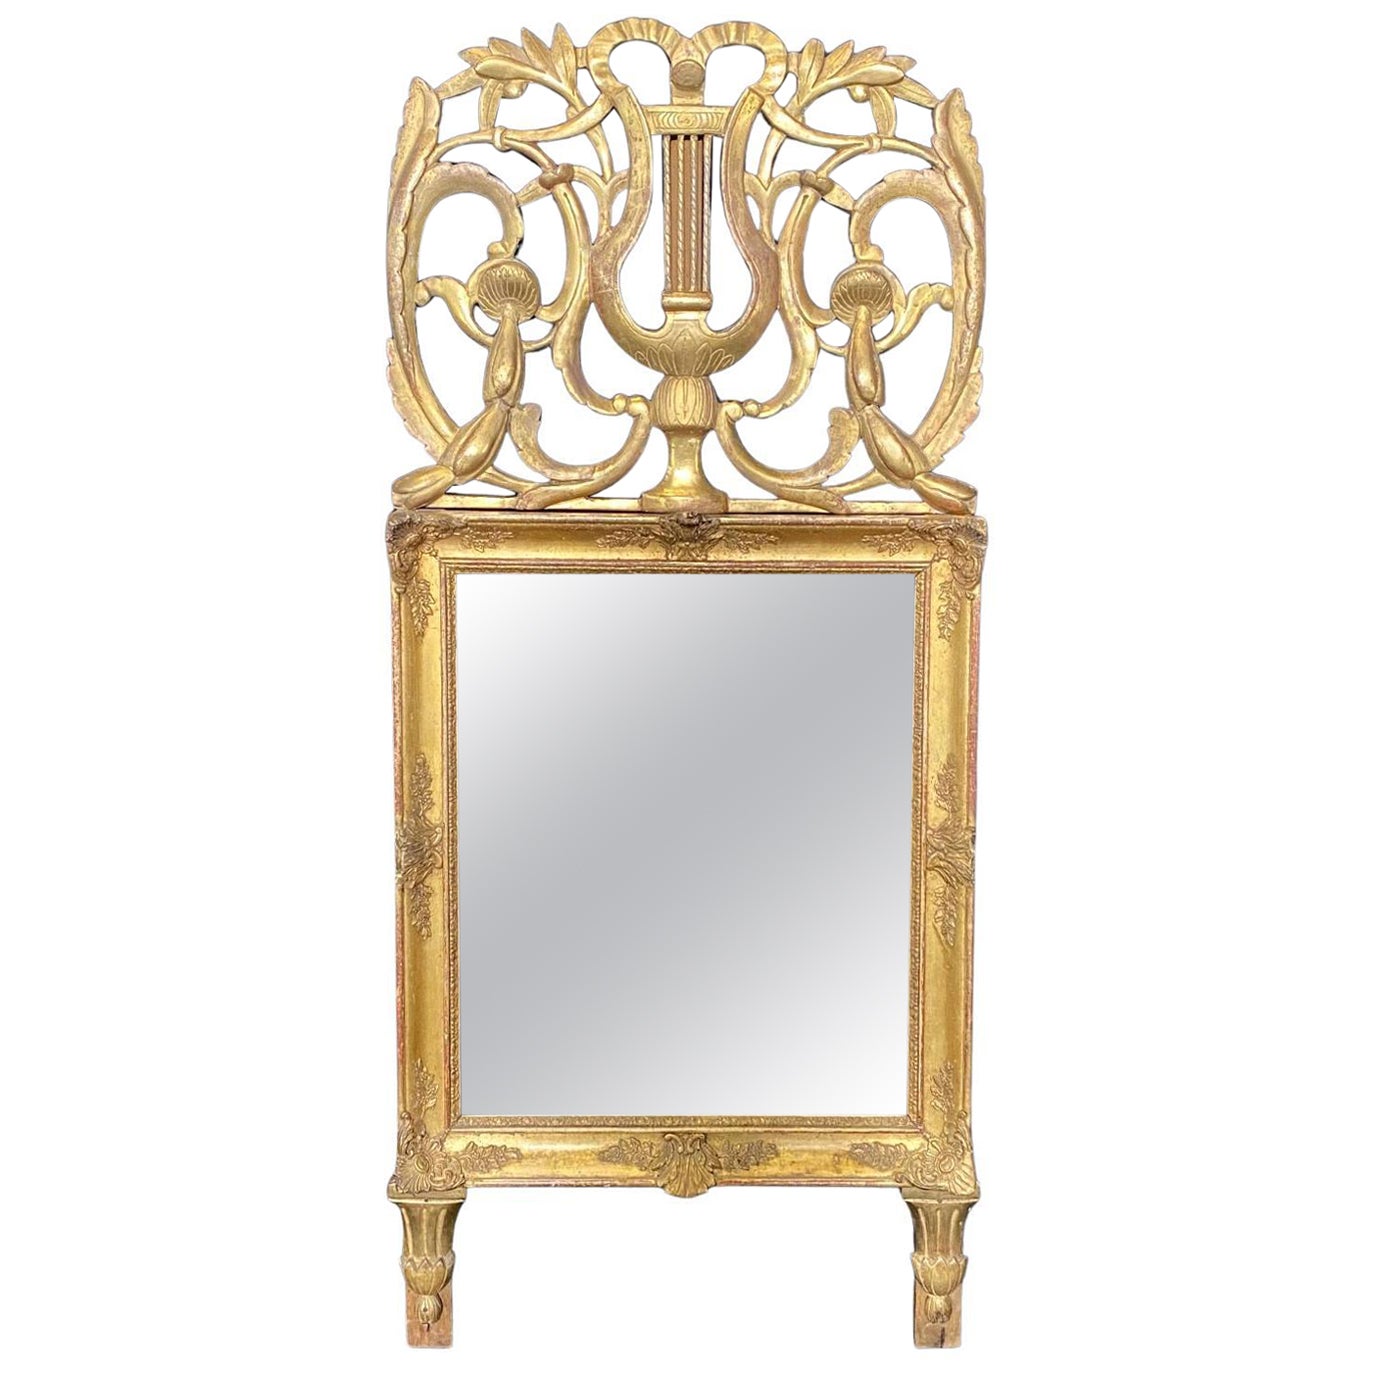 Rare Gem French Antique Louis XVI Mirror with Intricate Fronton Carving  For Sale